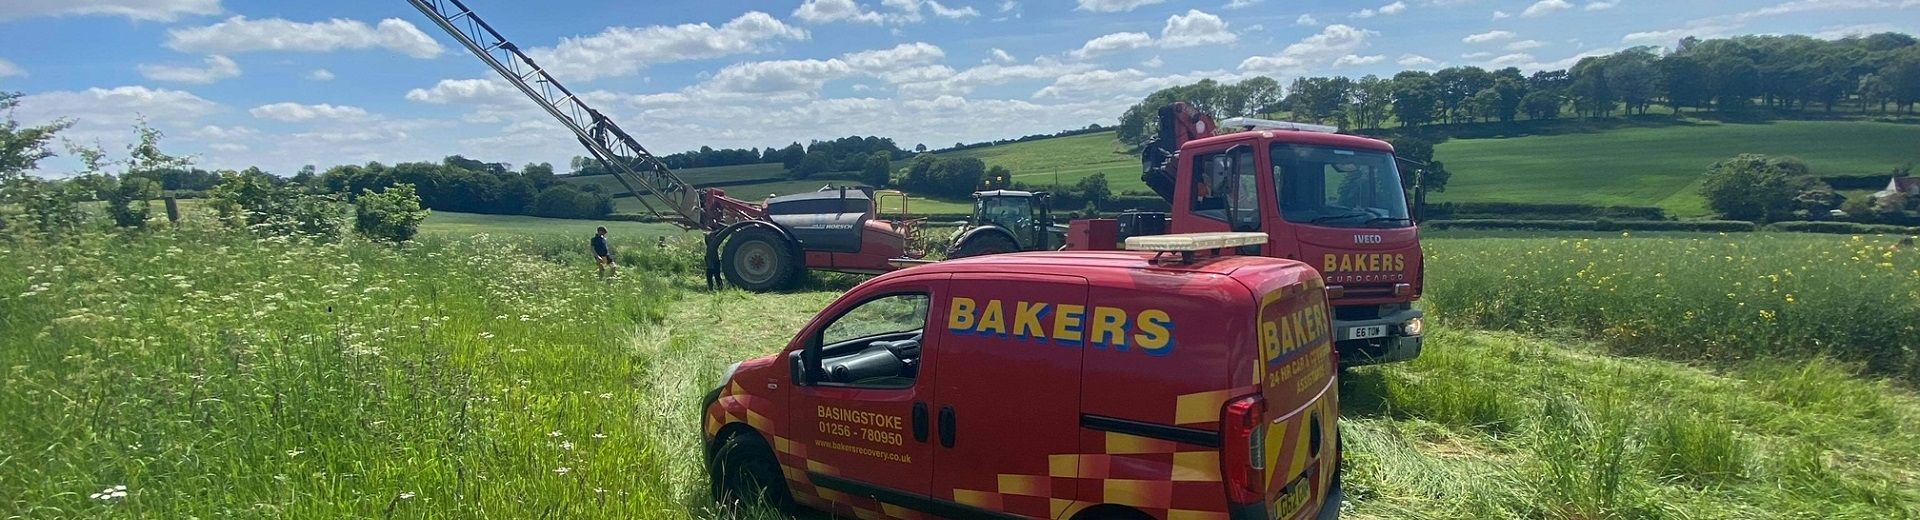 Bakers Recovery Lorry for Hampshire Roads